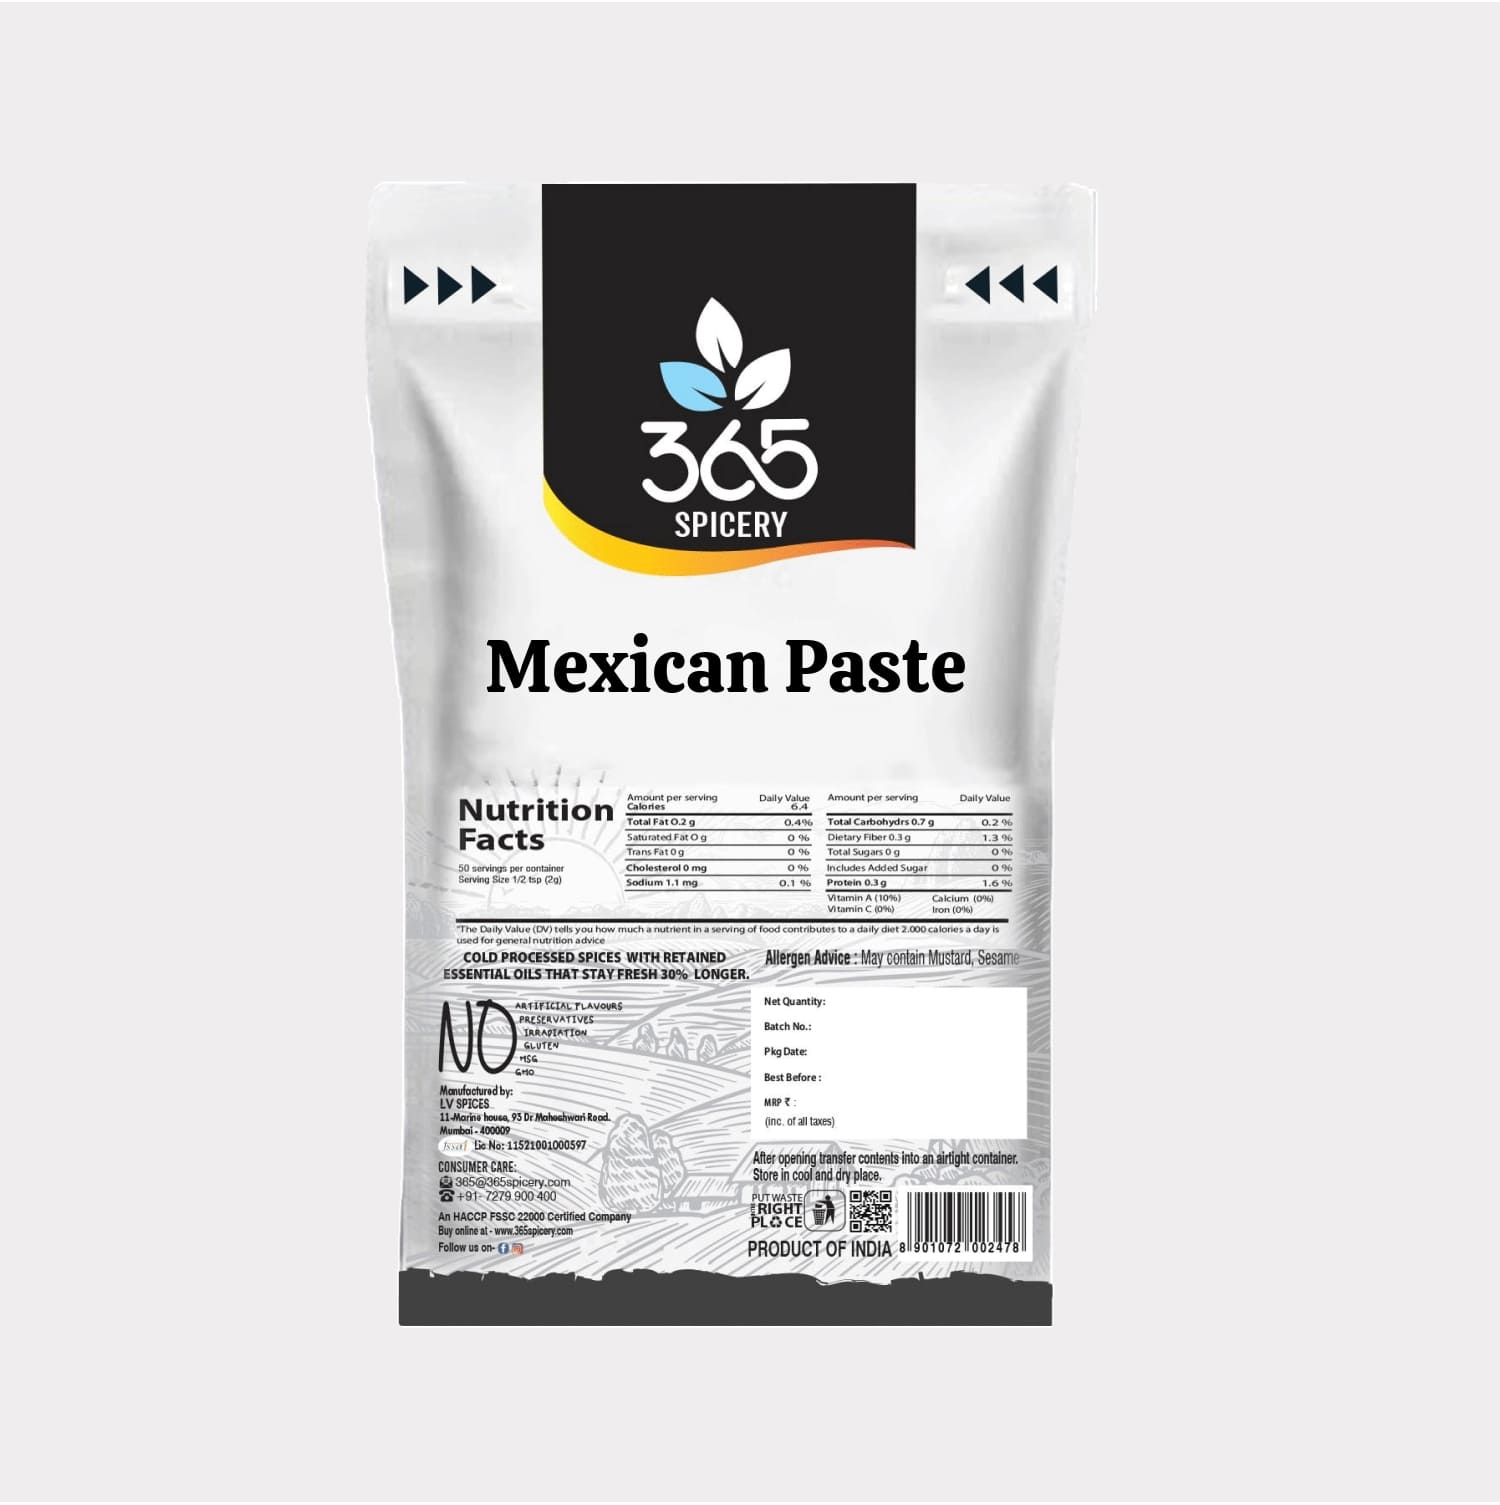 Mexican Paste